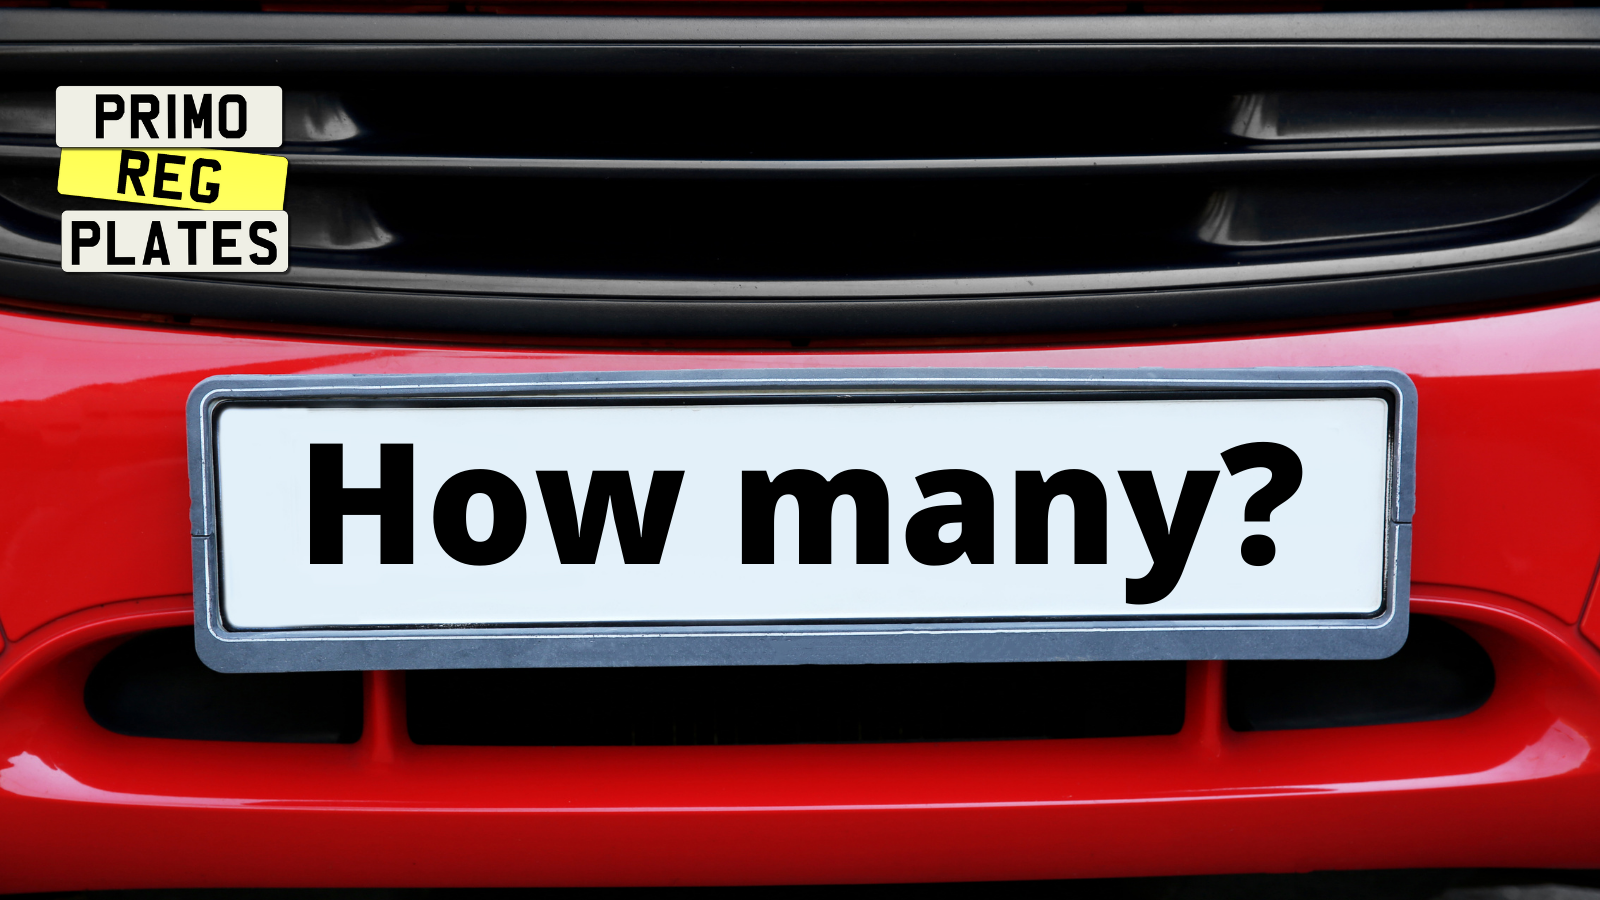 How many private number plates are there in the UK?